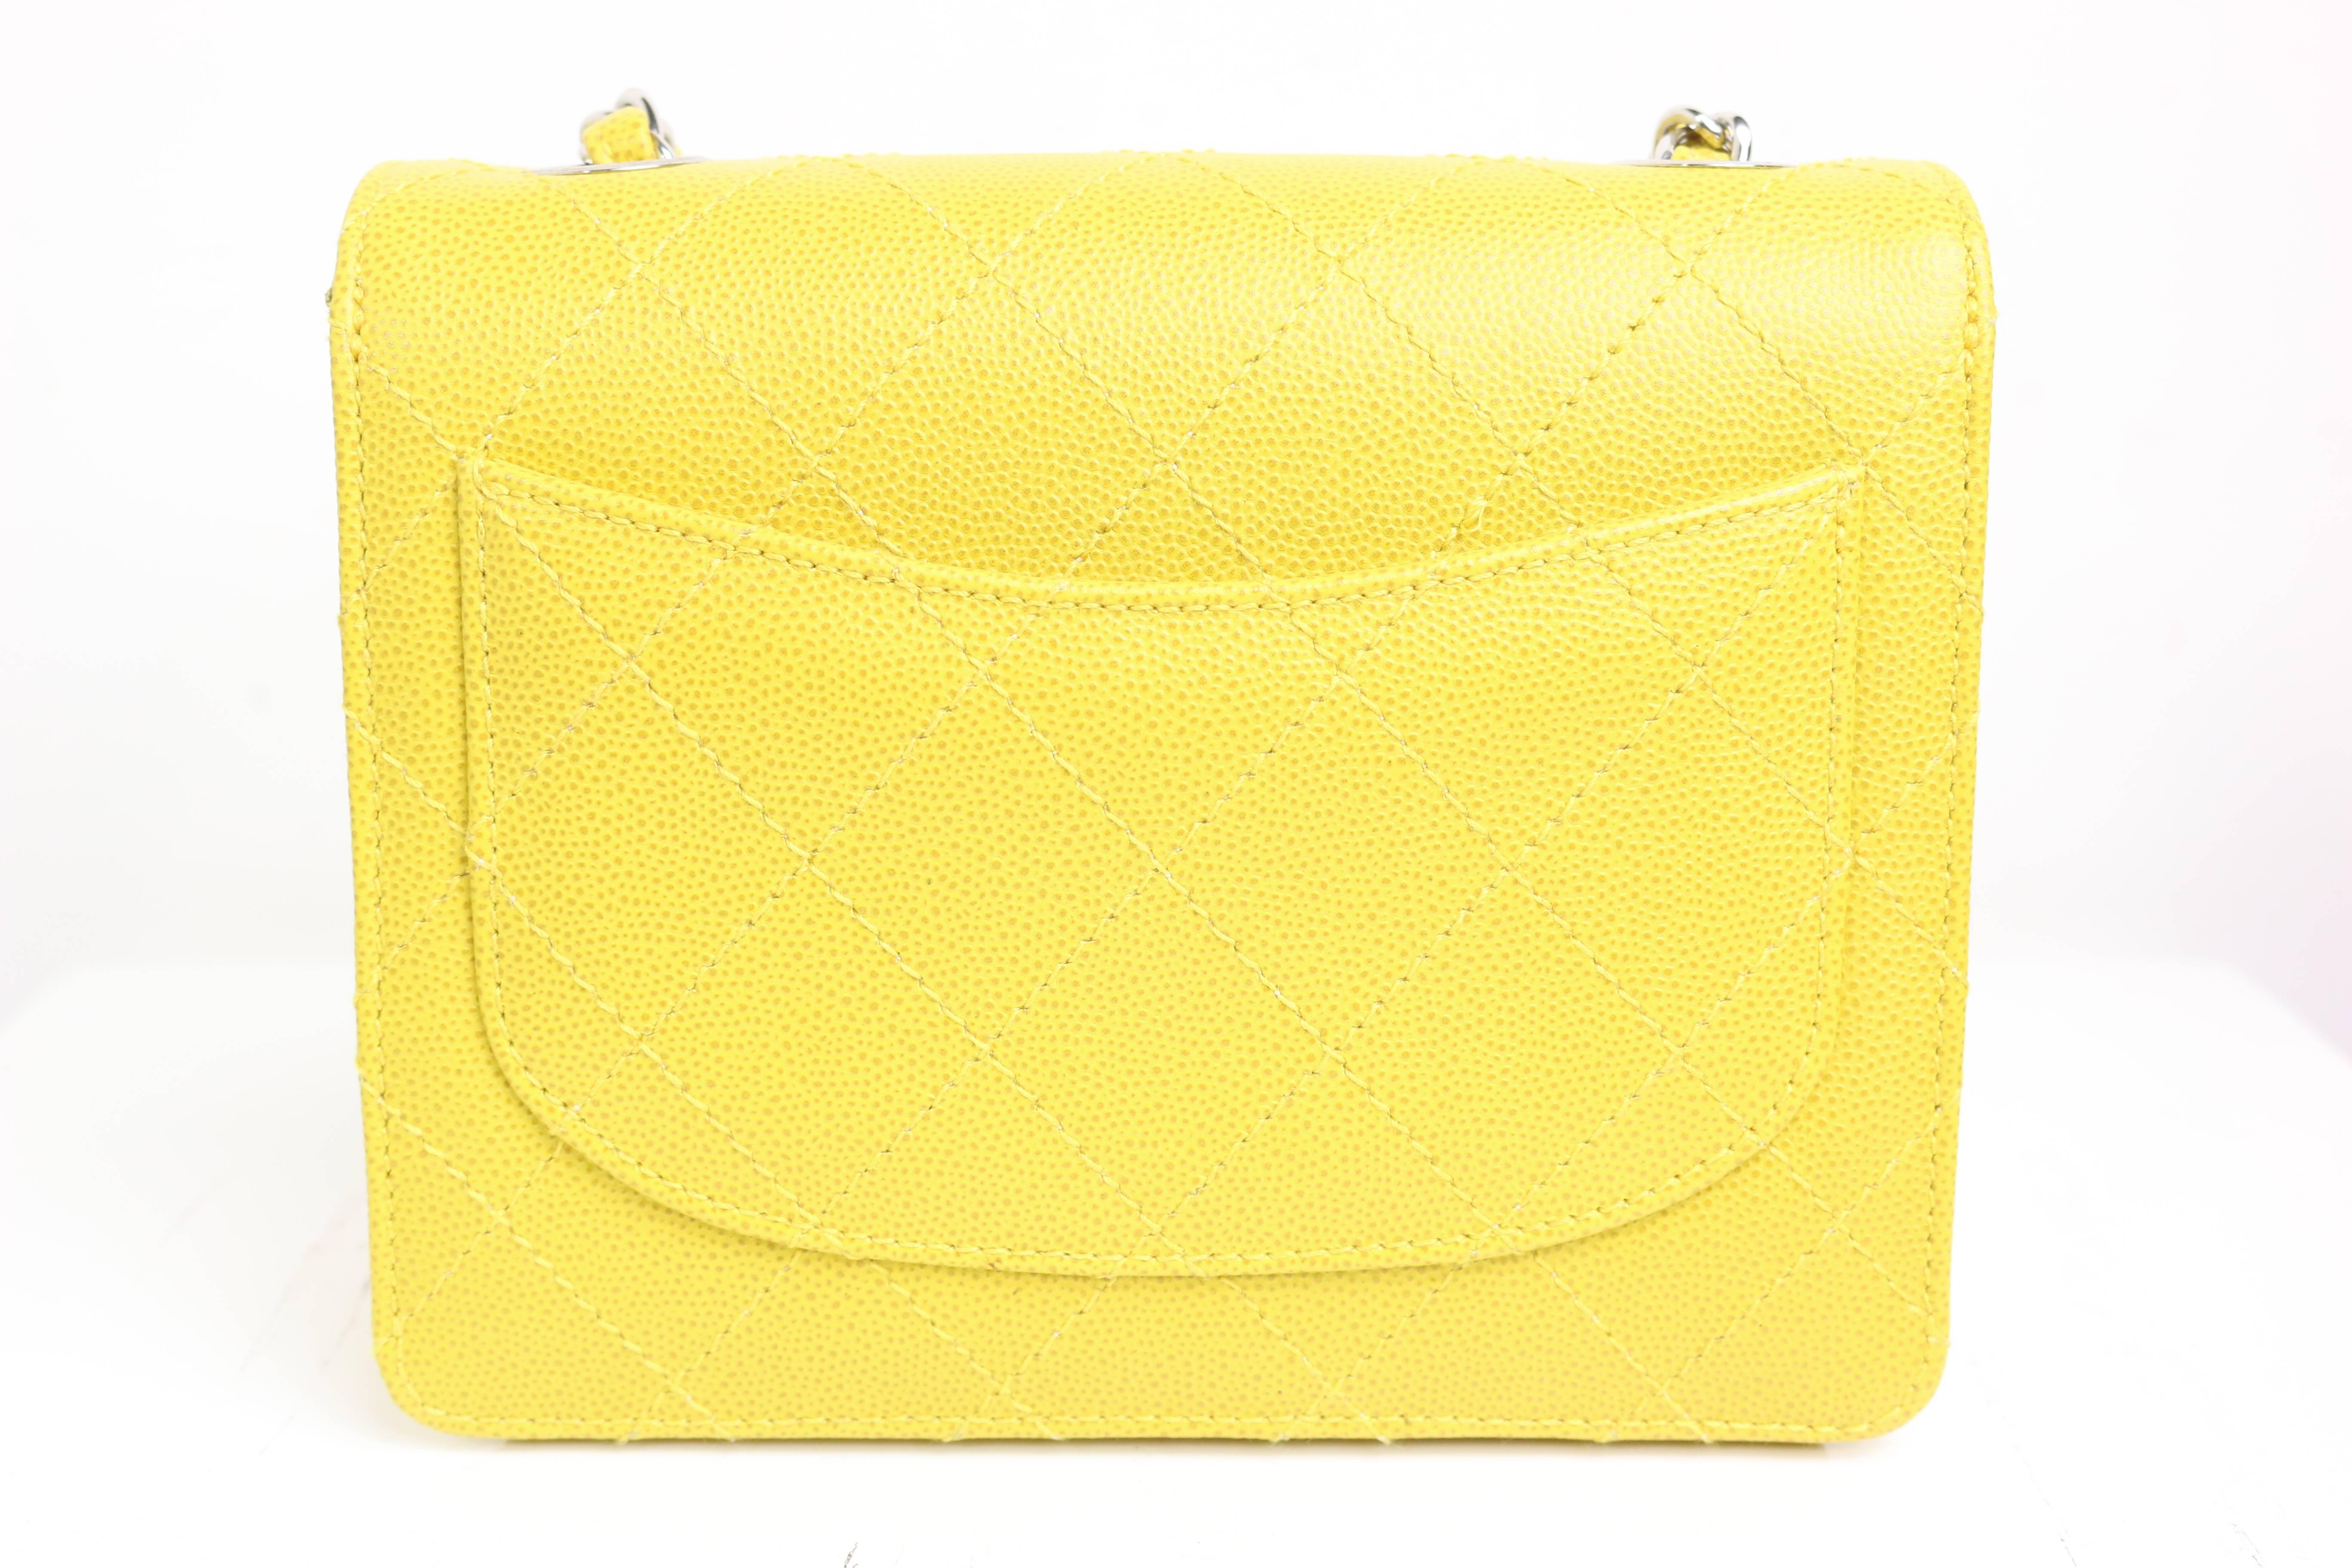 - Chanel classic quilted yellow caviar skin leather flap mini bag with silver 